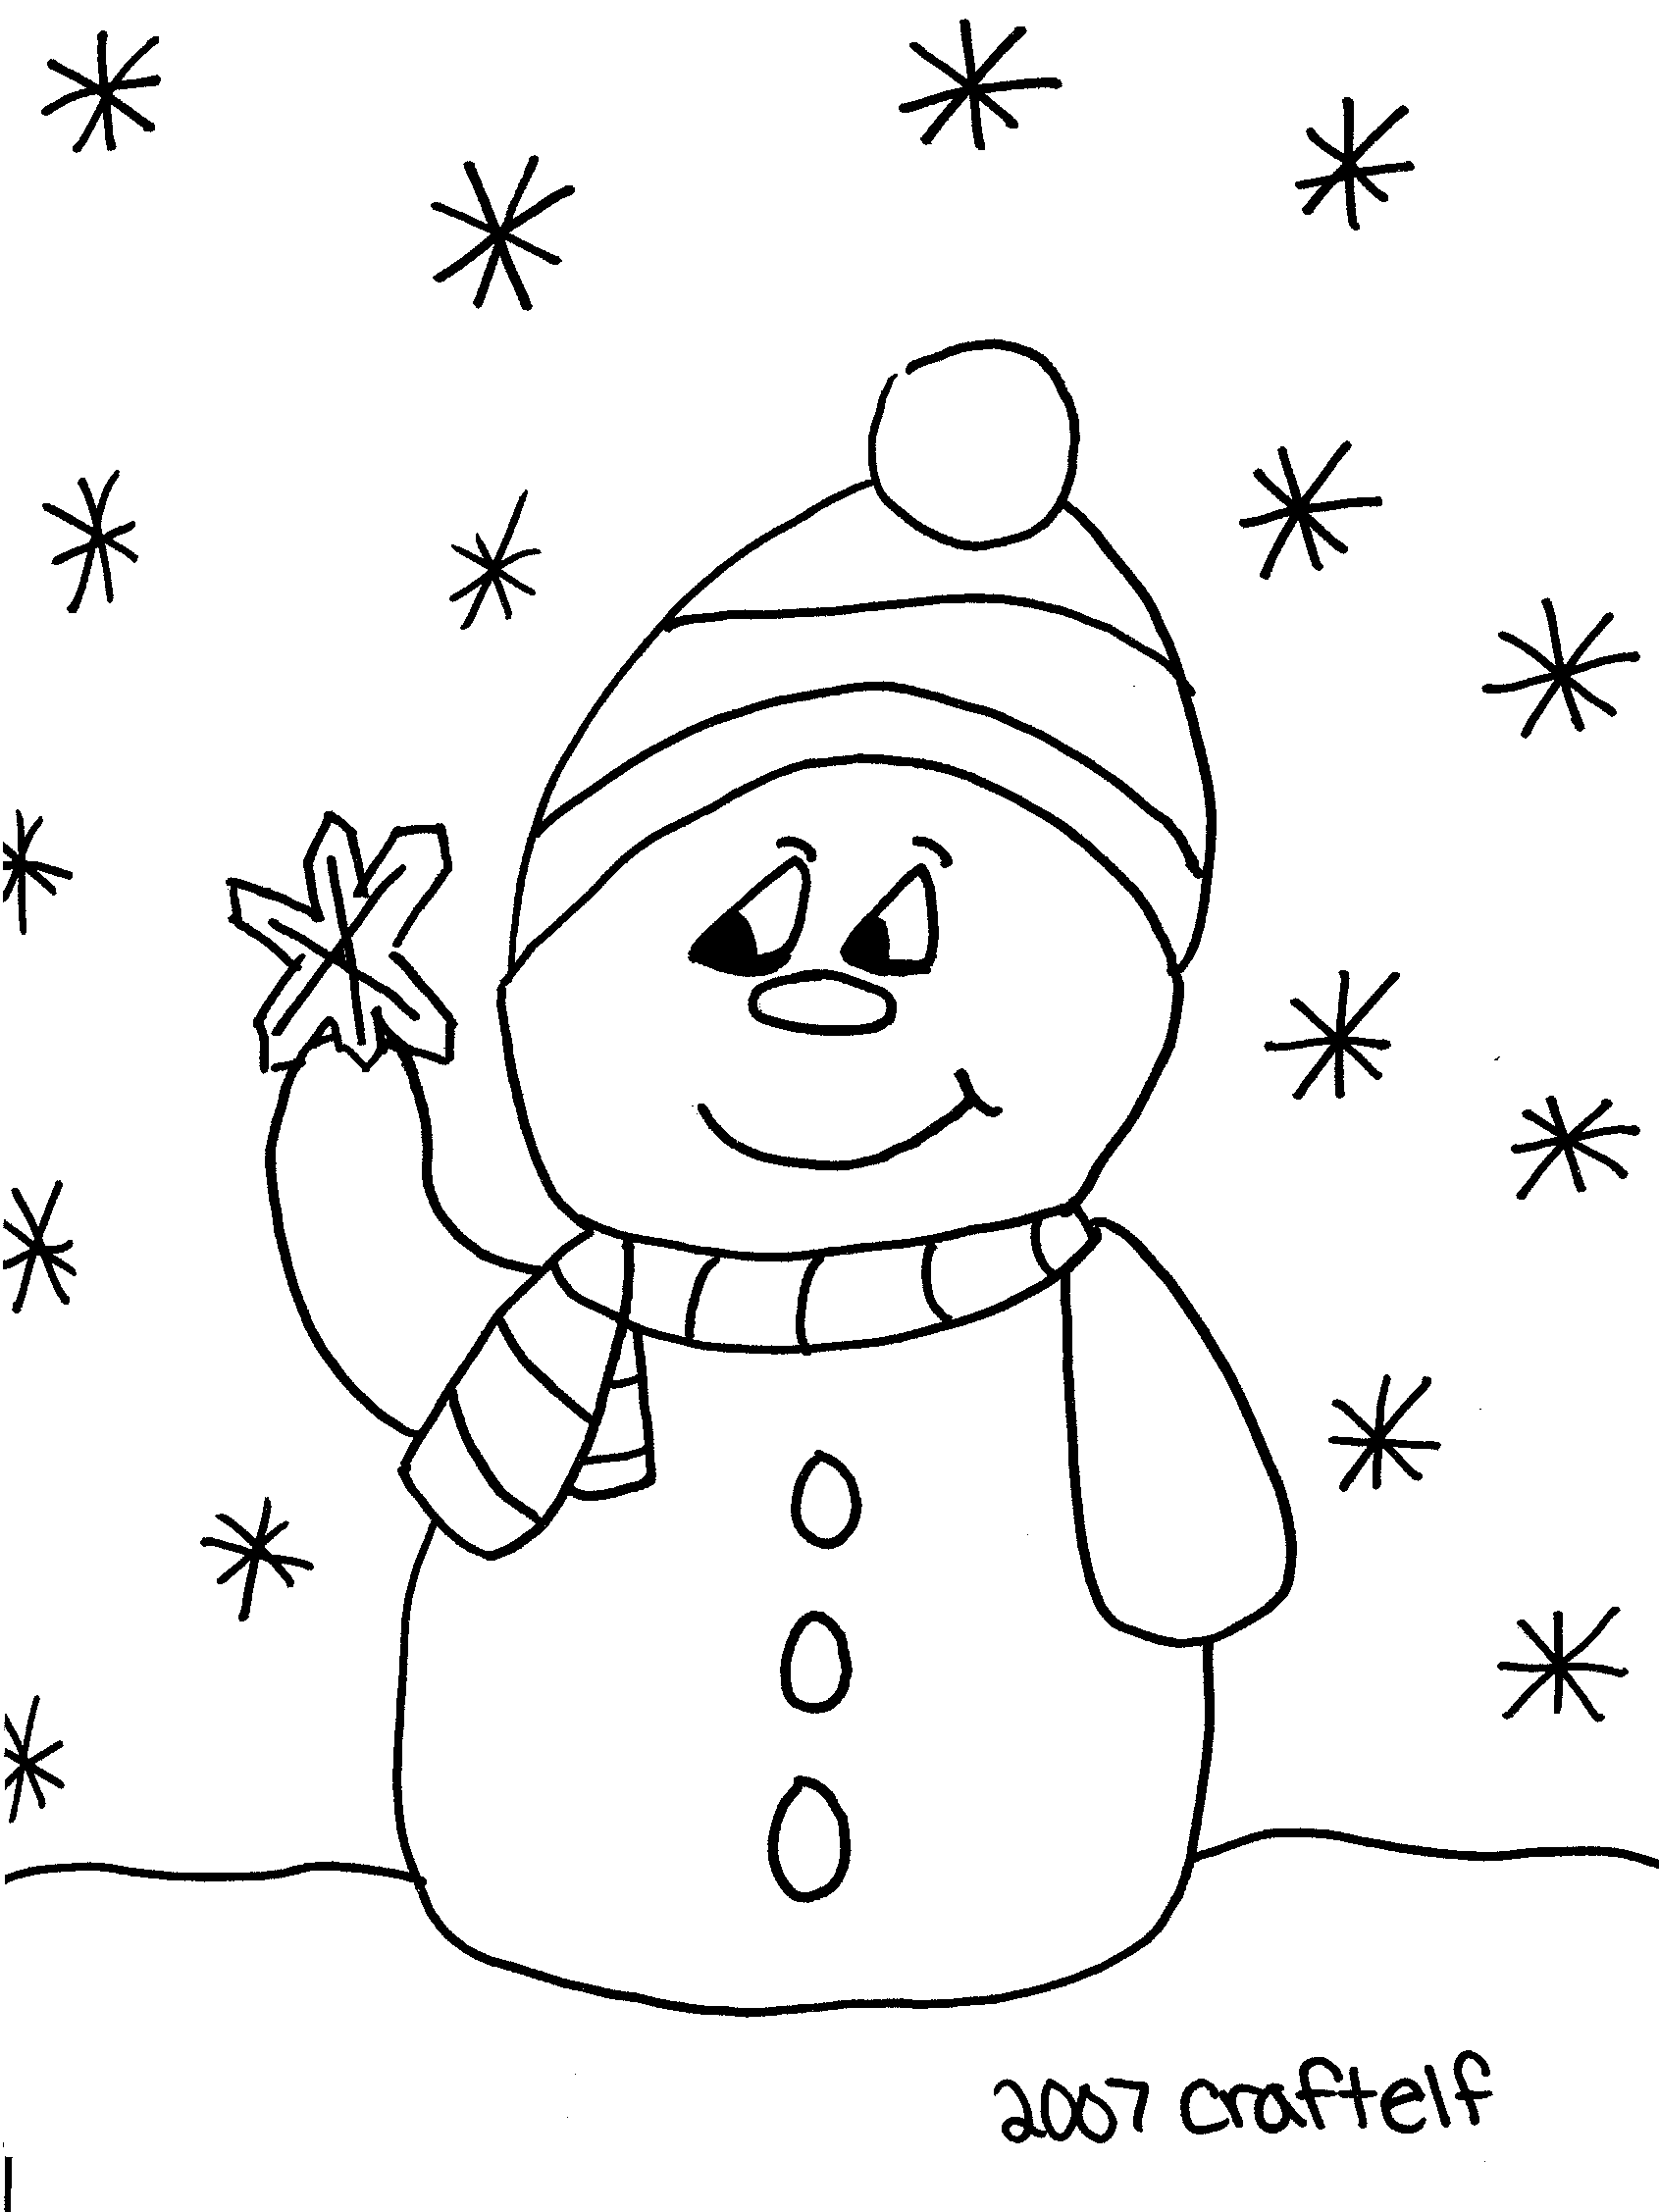 Free Christmas Coloring Page Snowman